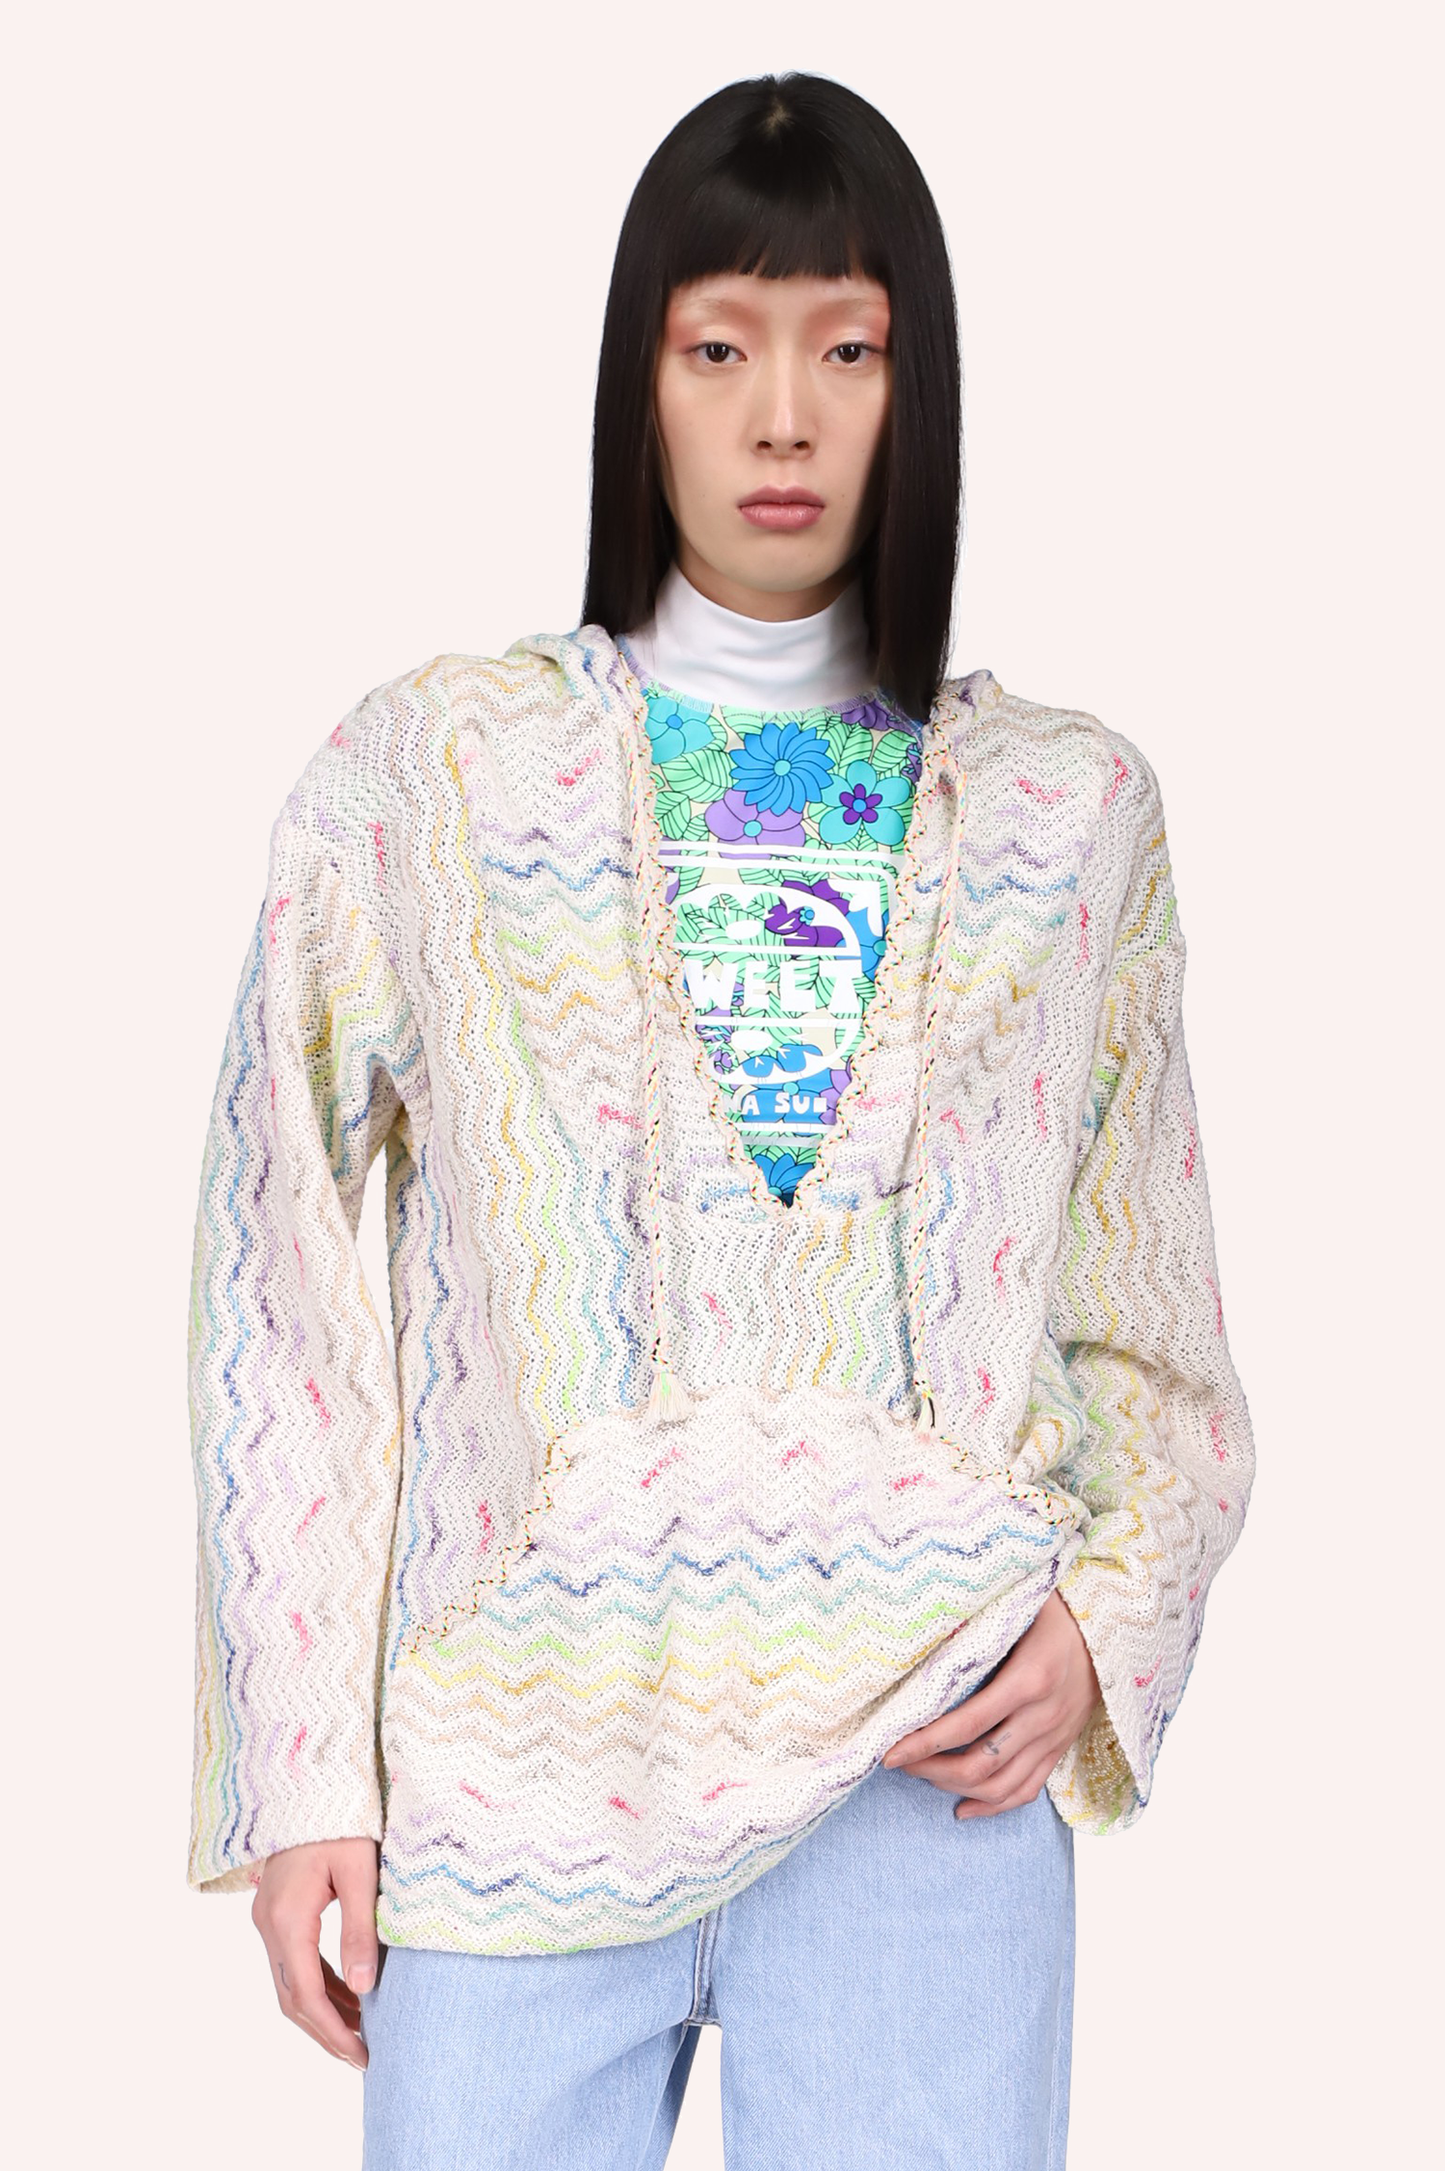 Shangri-La Knit off white white, blue, yellow & green insert, deep collar cut with a lace, knit texture